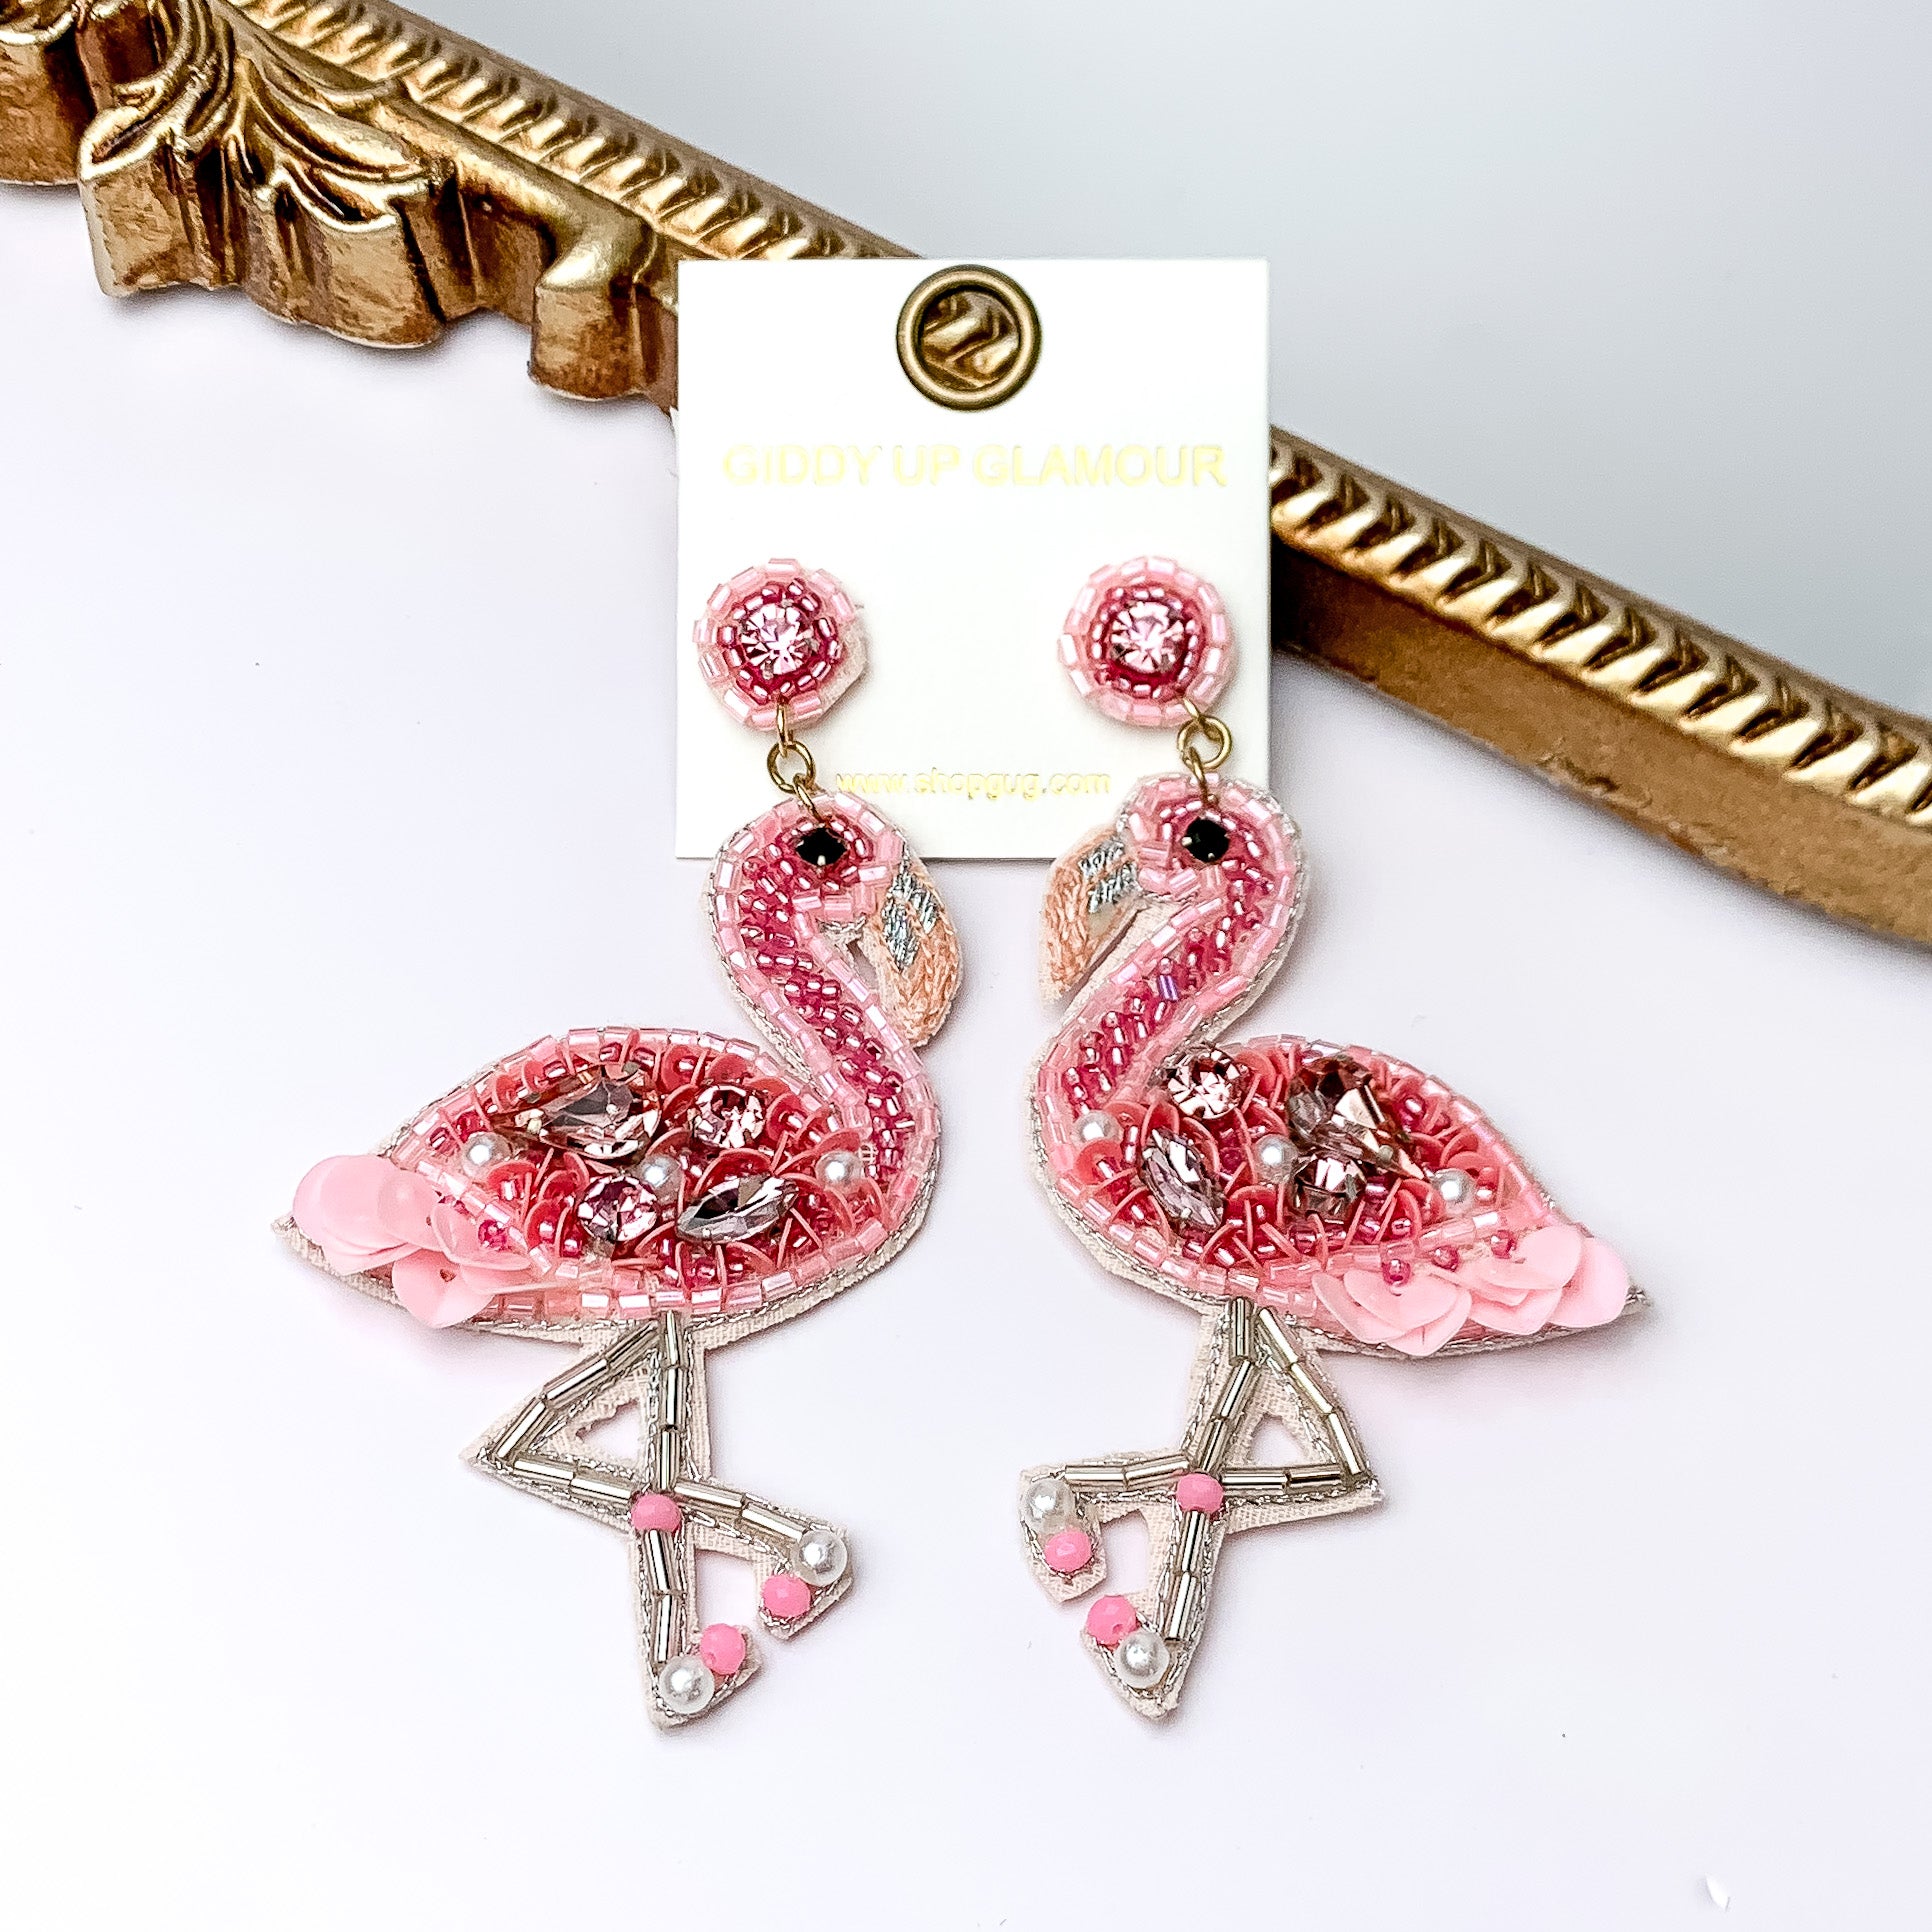 Pictured are beaded flamingo earrings in a light pink beading and different size stones on the body of flamingo. These earrings are propped up on a gold mirror with a white background.